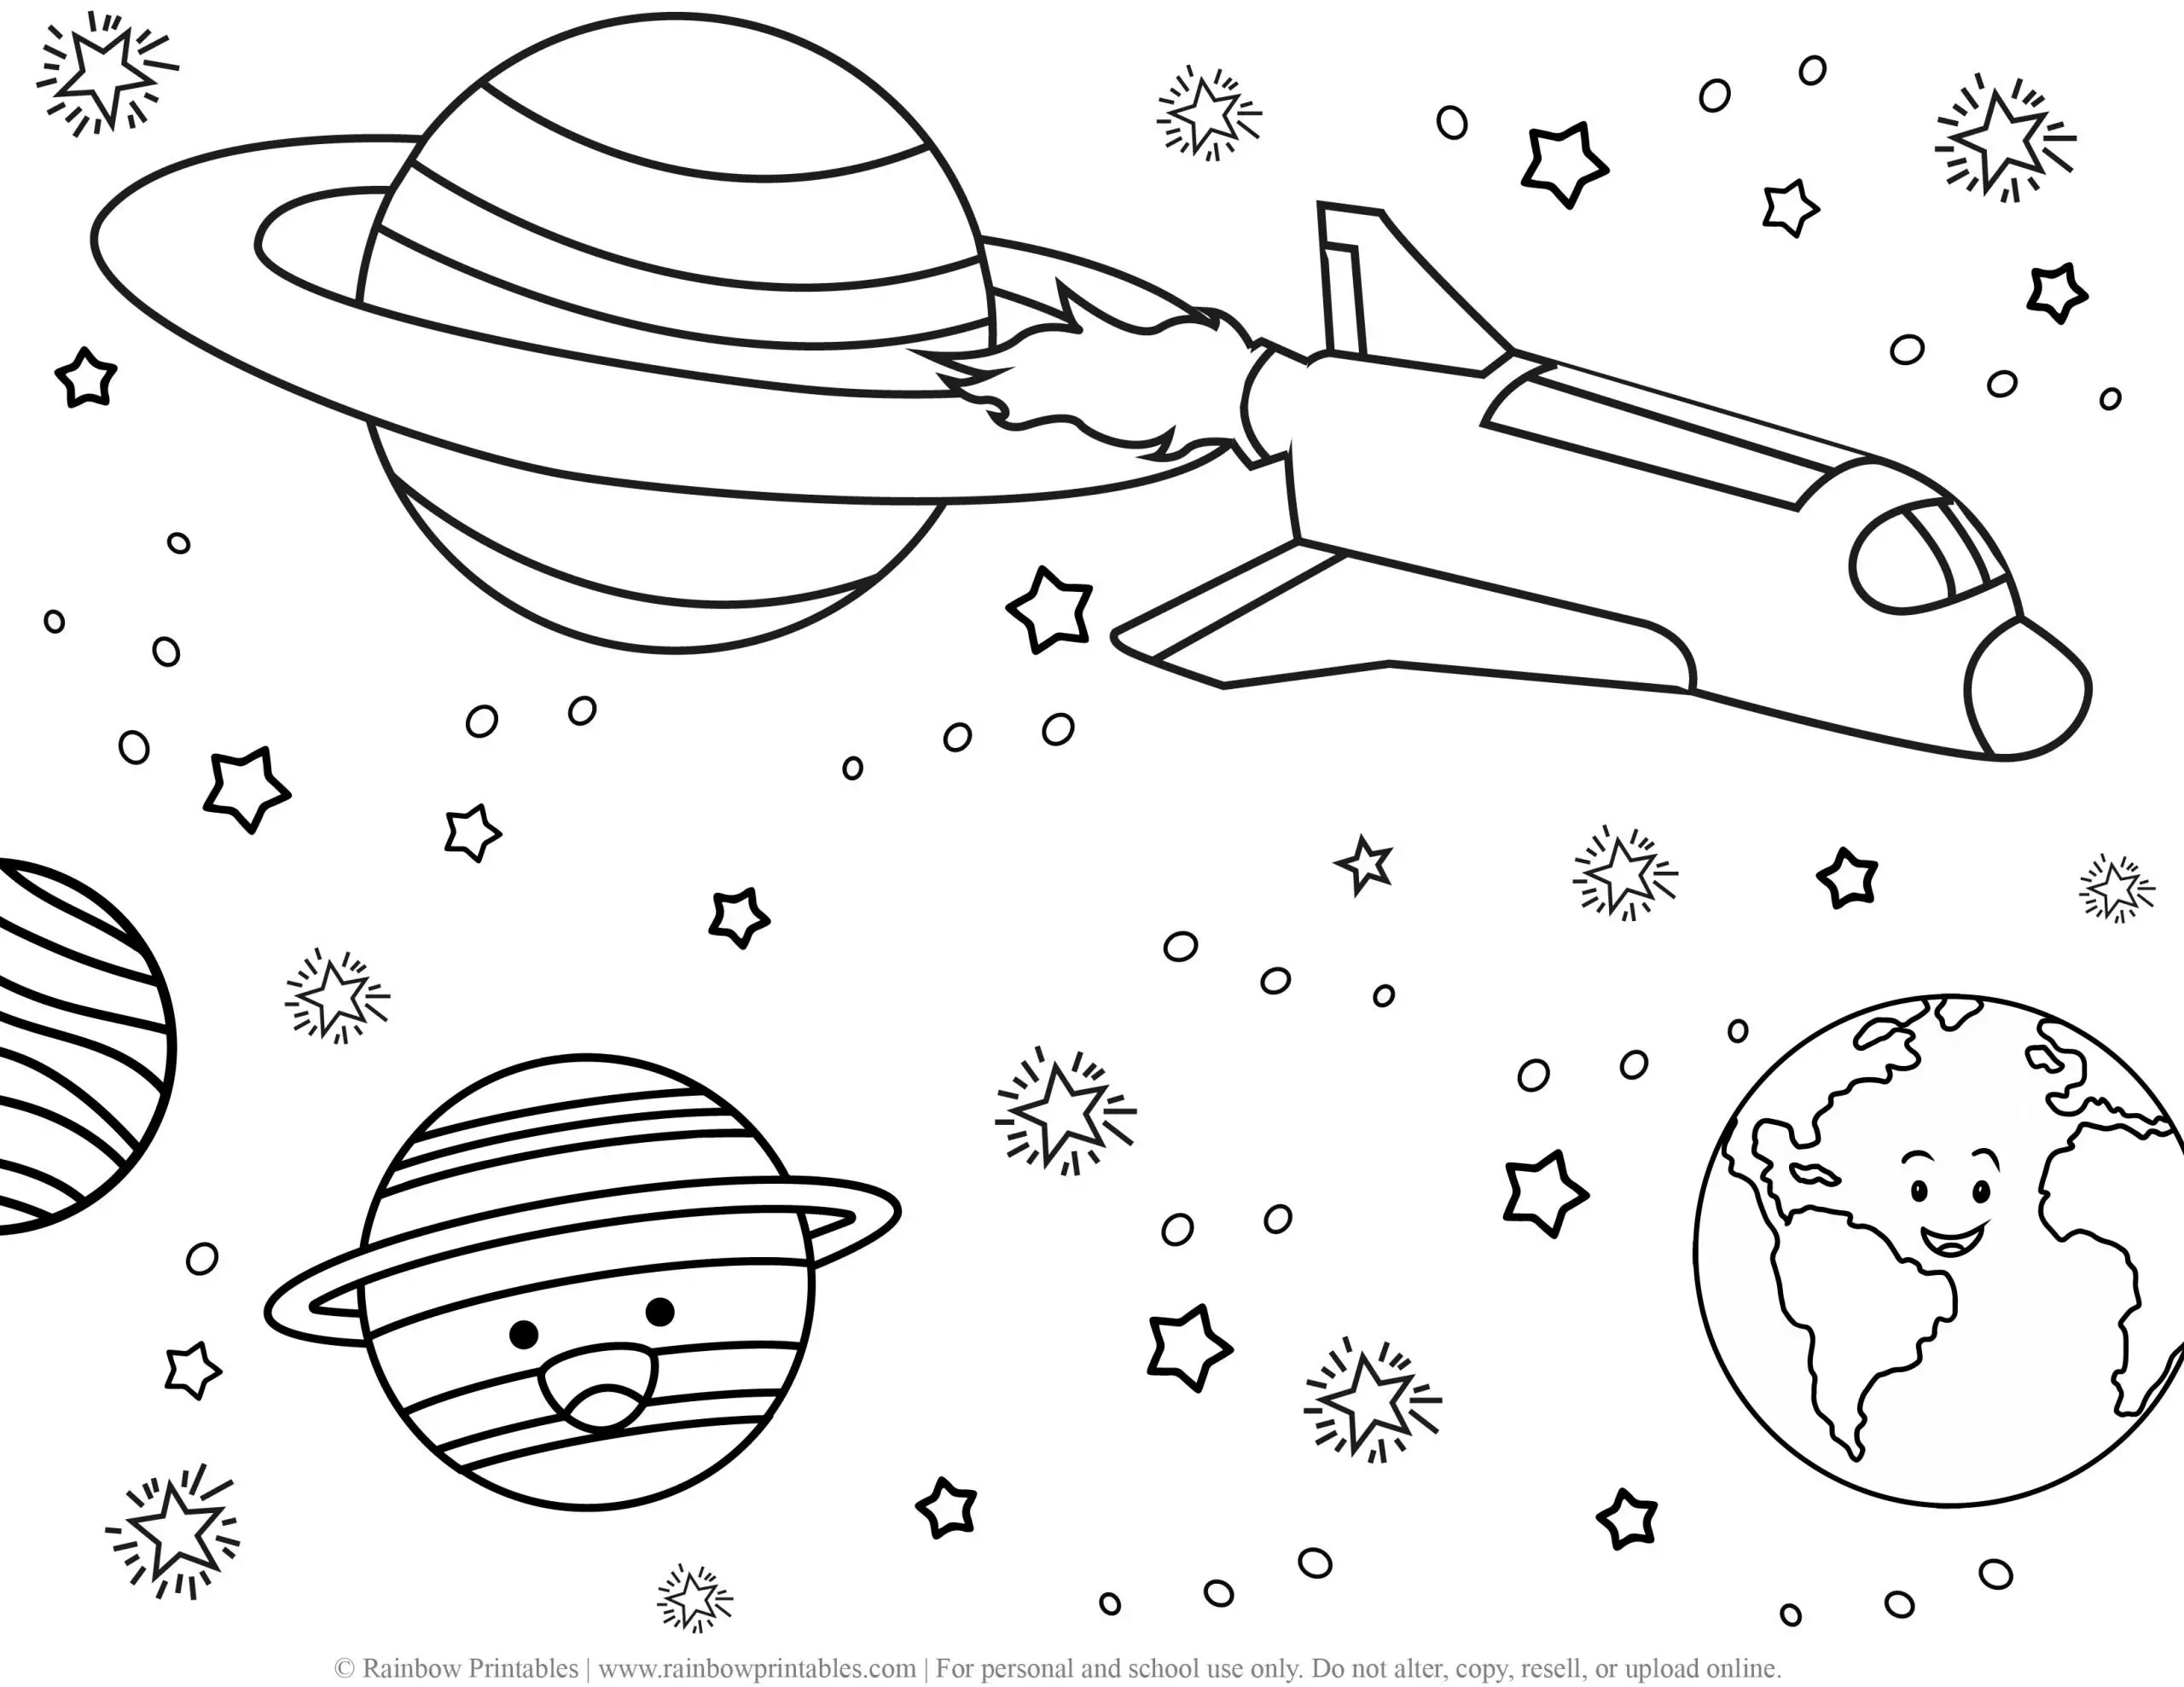 Astronaut, Rocket Ship, Outer Space Coloring Pages - Rainbow Printables